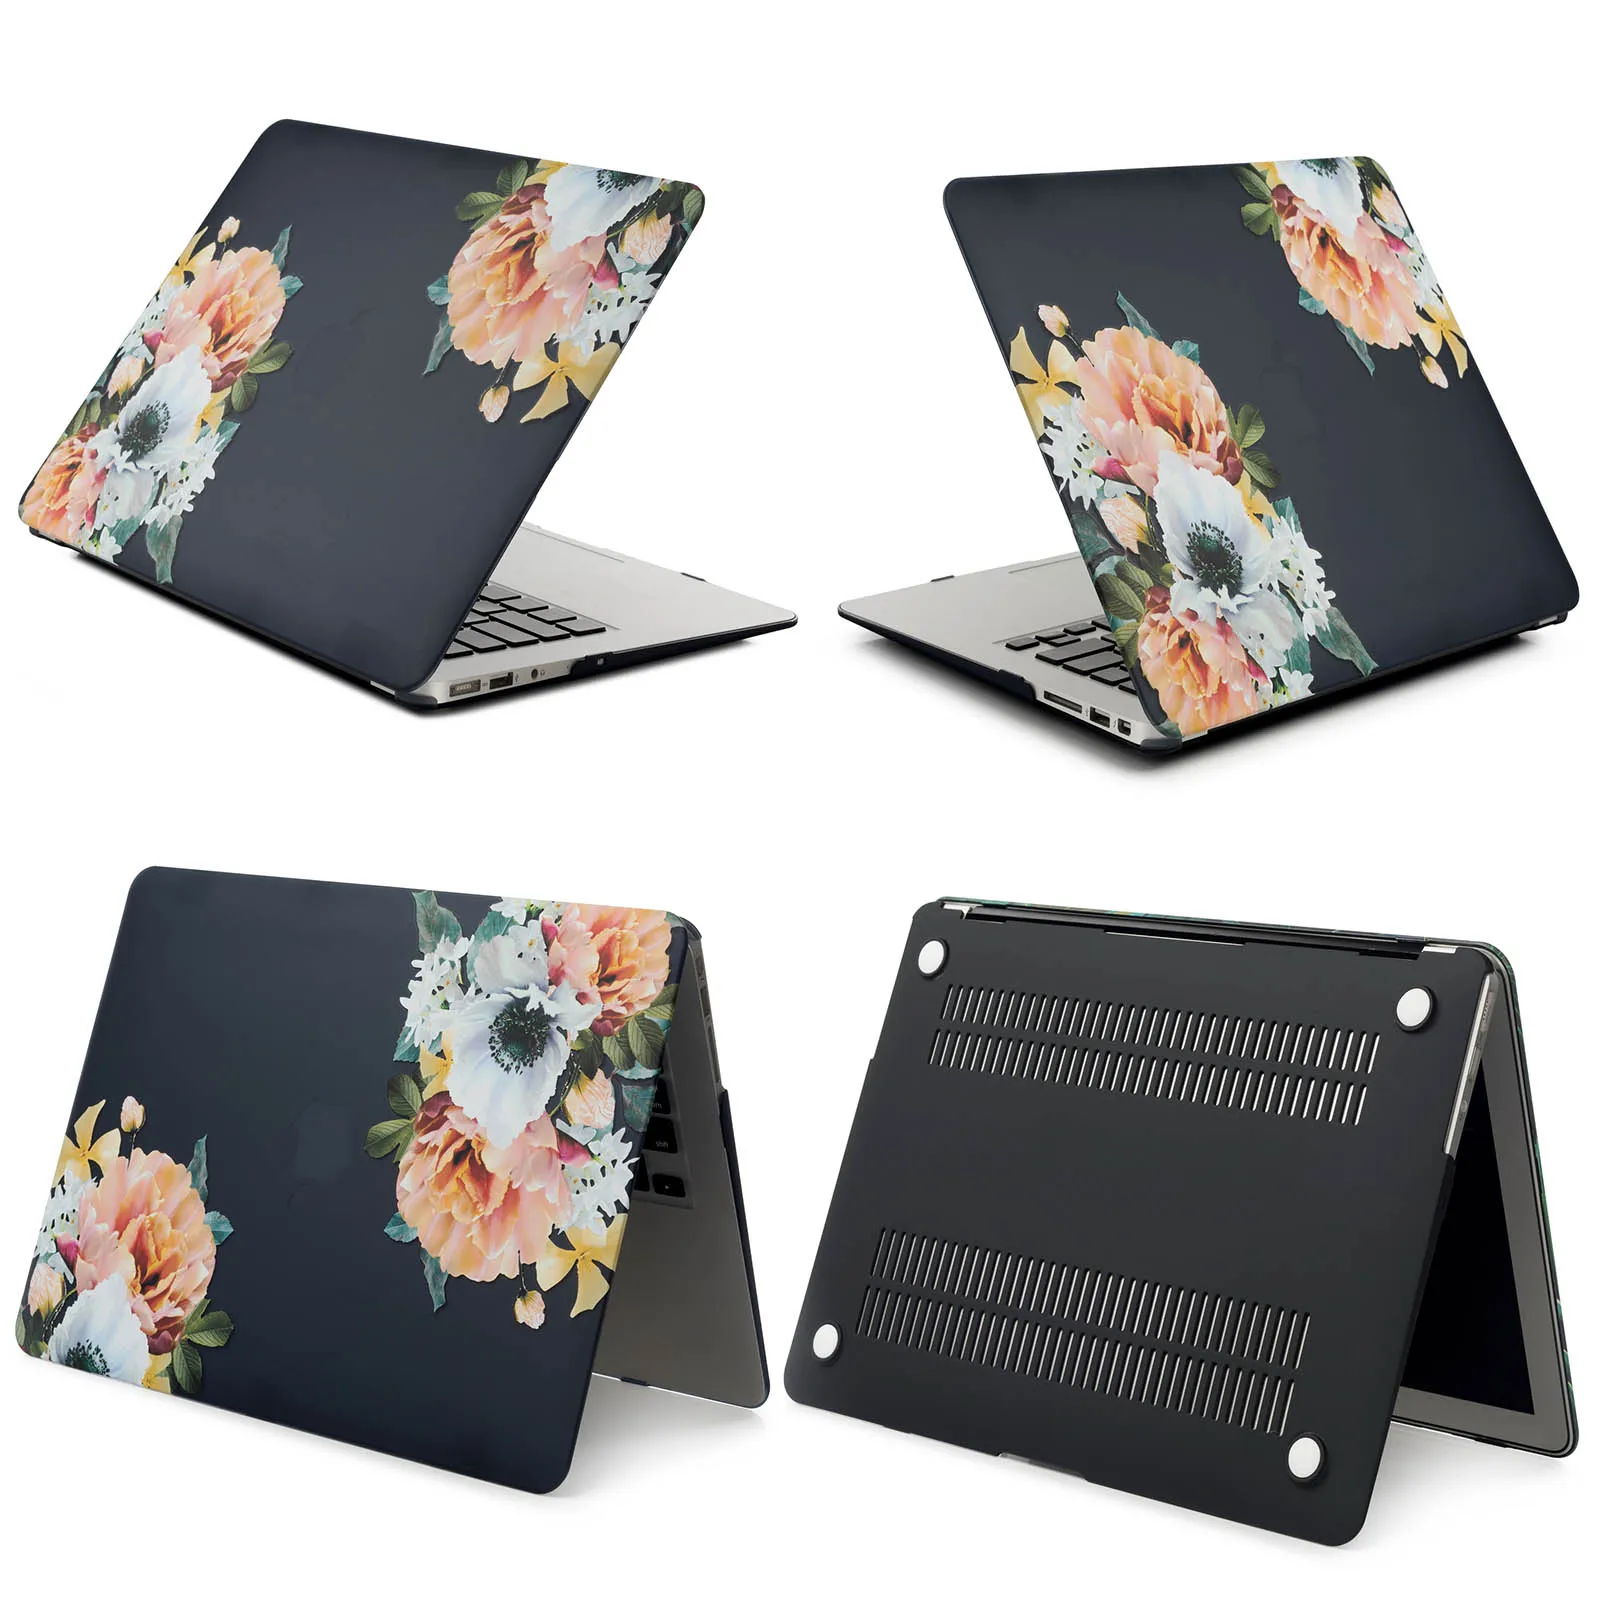 

for Macbook Air Pro Retina 11 12 13.3 New Mac Book 13 15 Touch Bar/Touch ID 2019 2018 A1932 A2159 A1706 A1989 New Marble Case